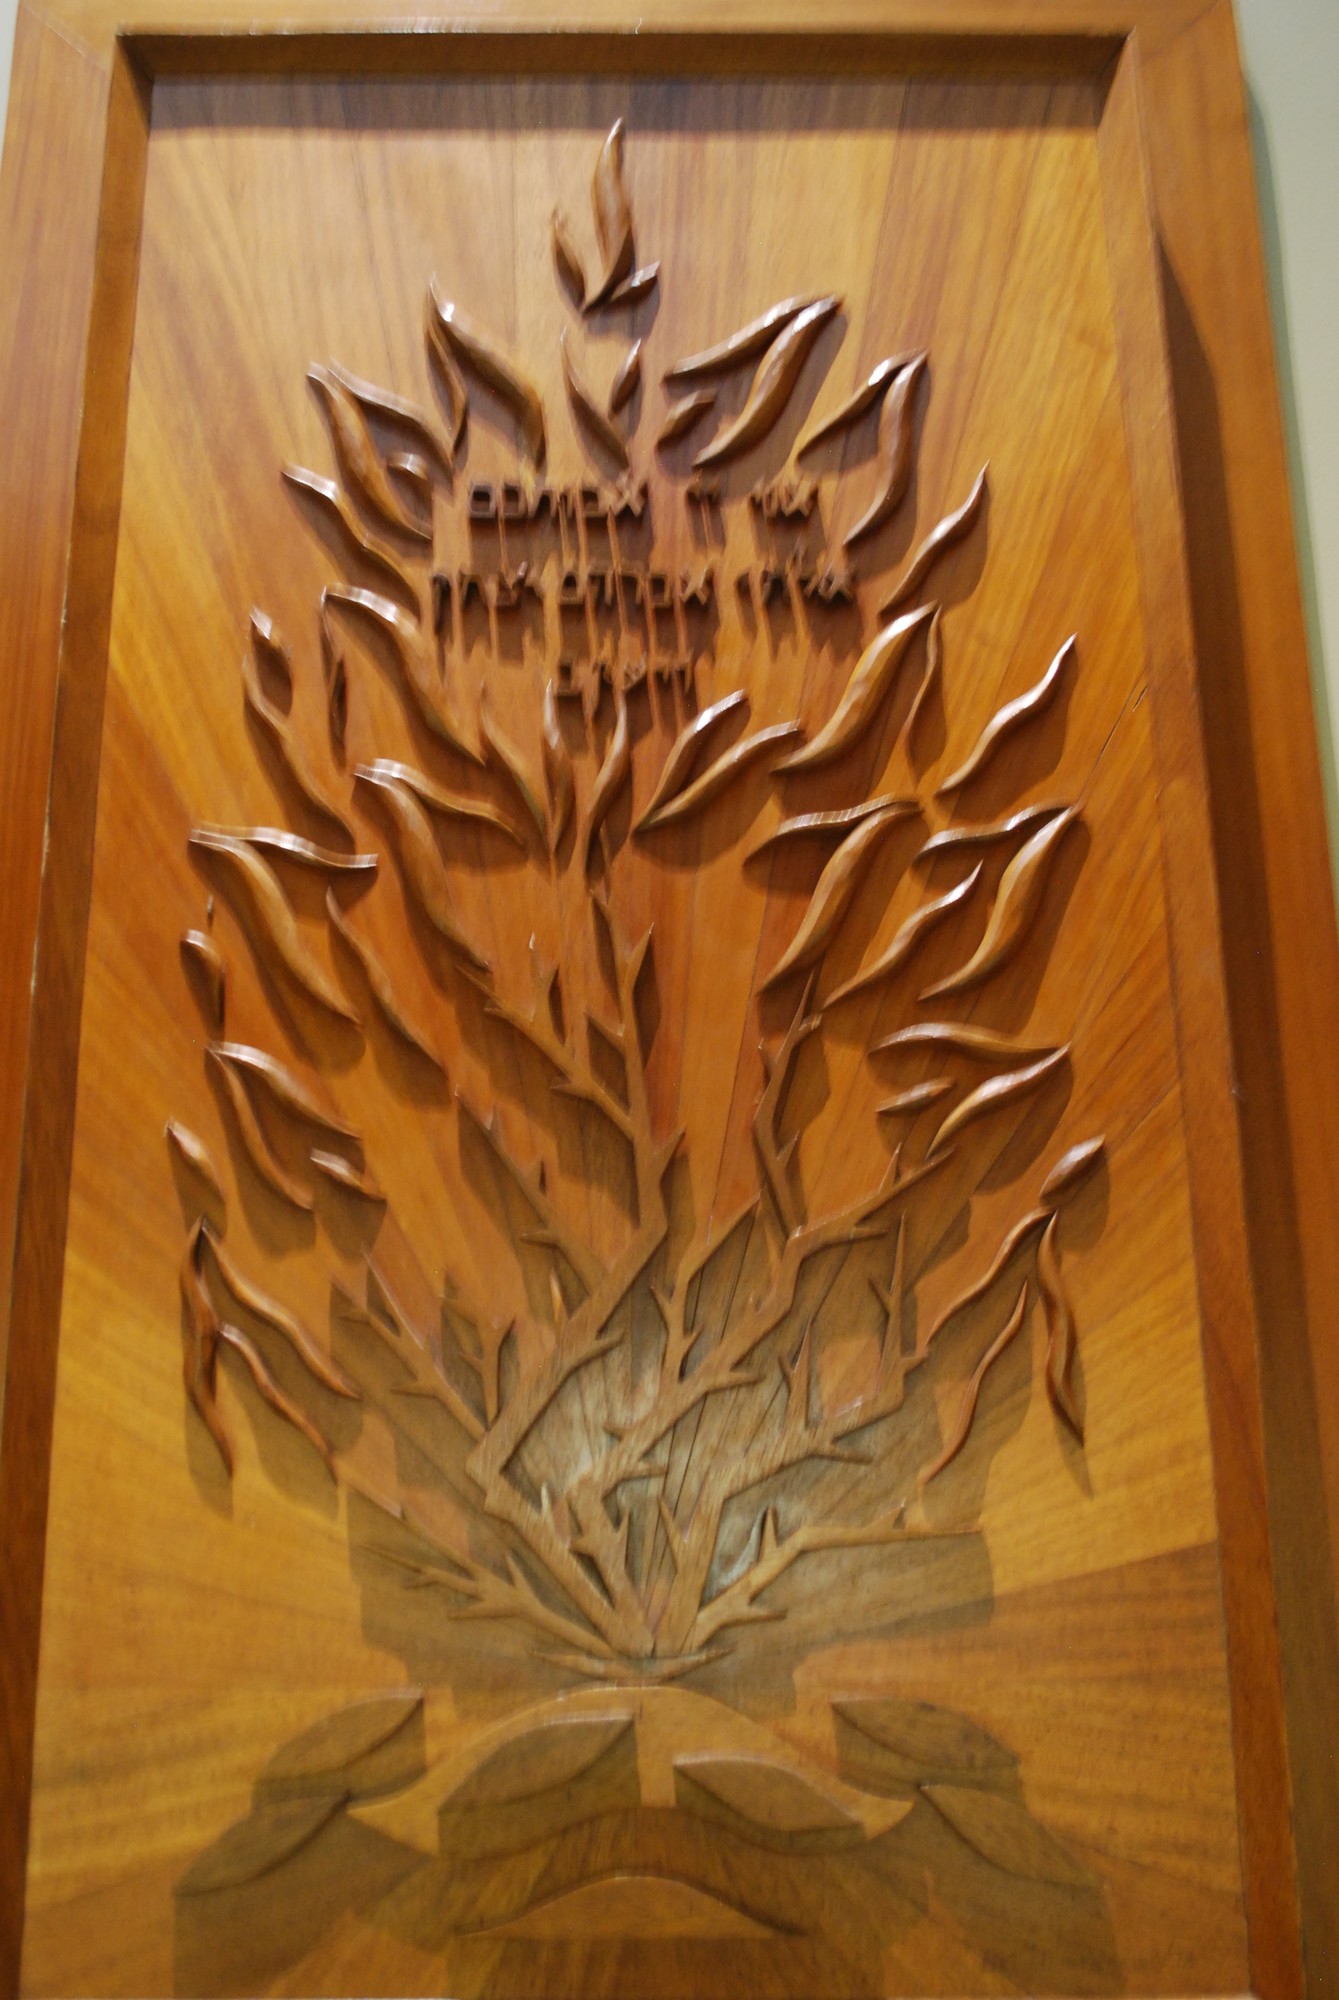 Nat Haister carved “The Burning Bush” displayed at Temple Am Echad.